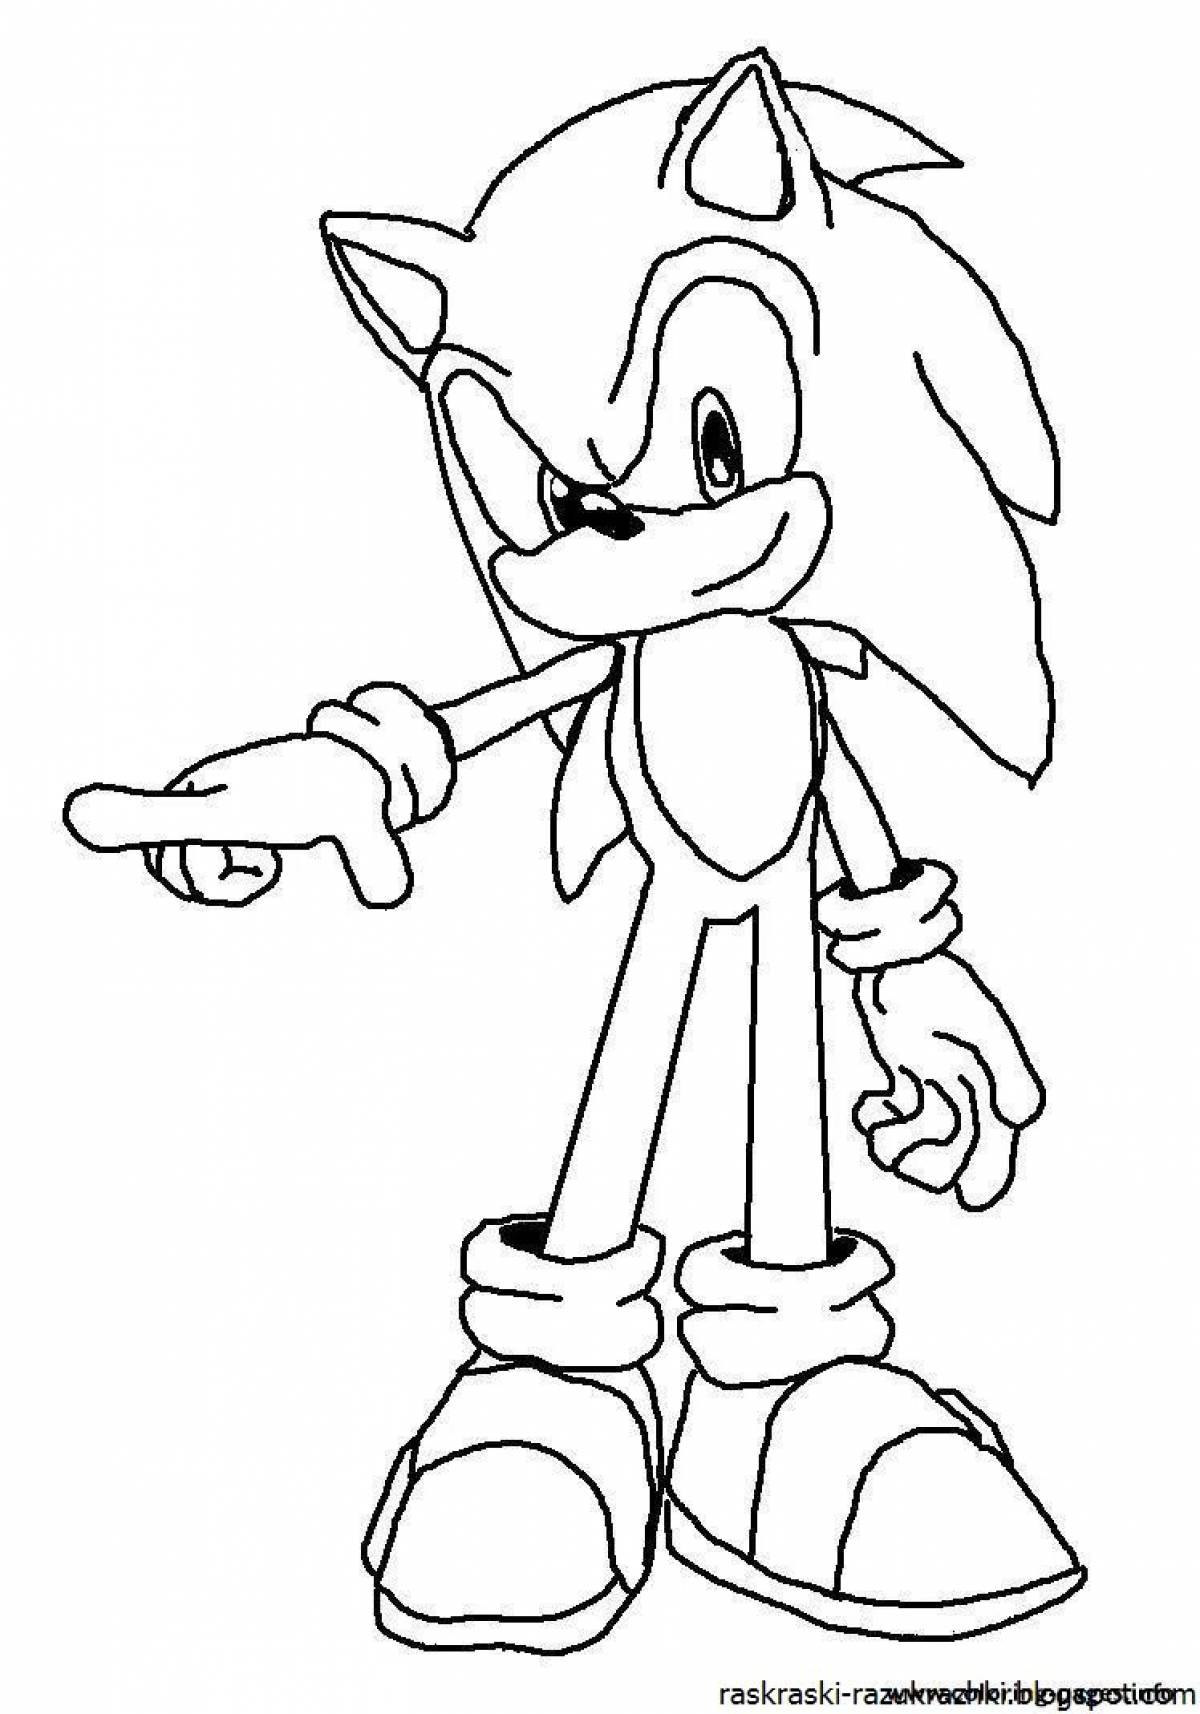 Fancy sonic the hedgehog coloring book